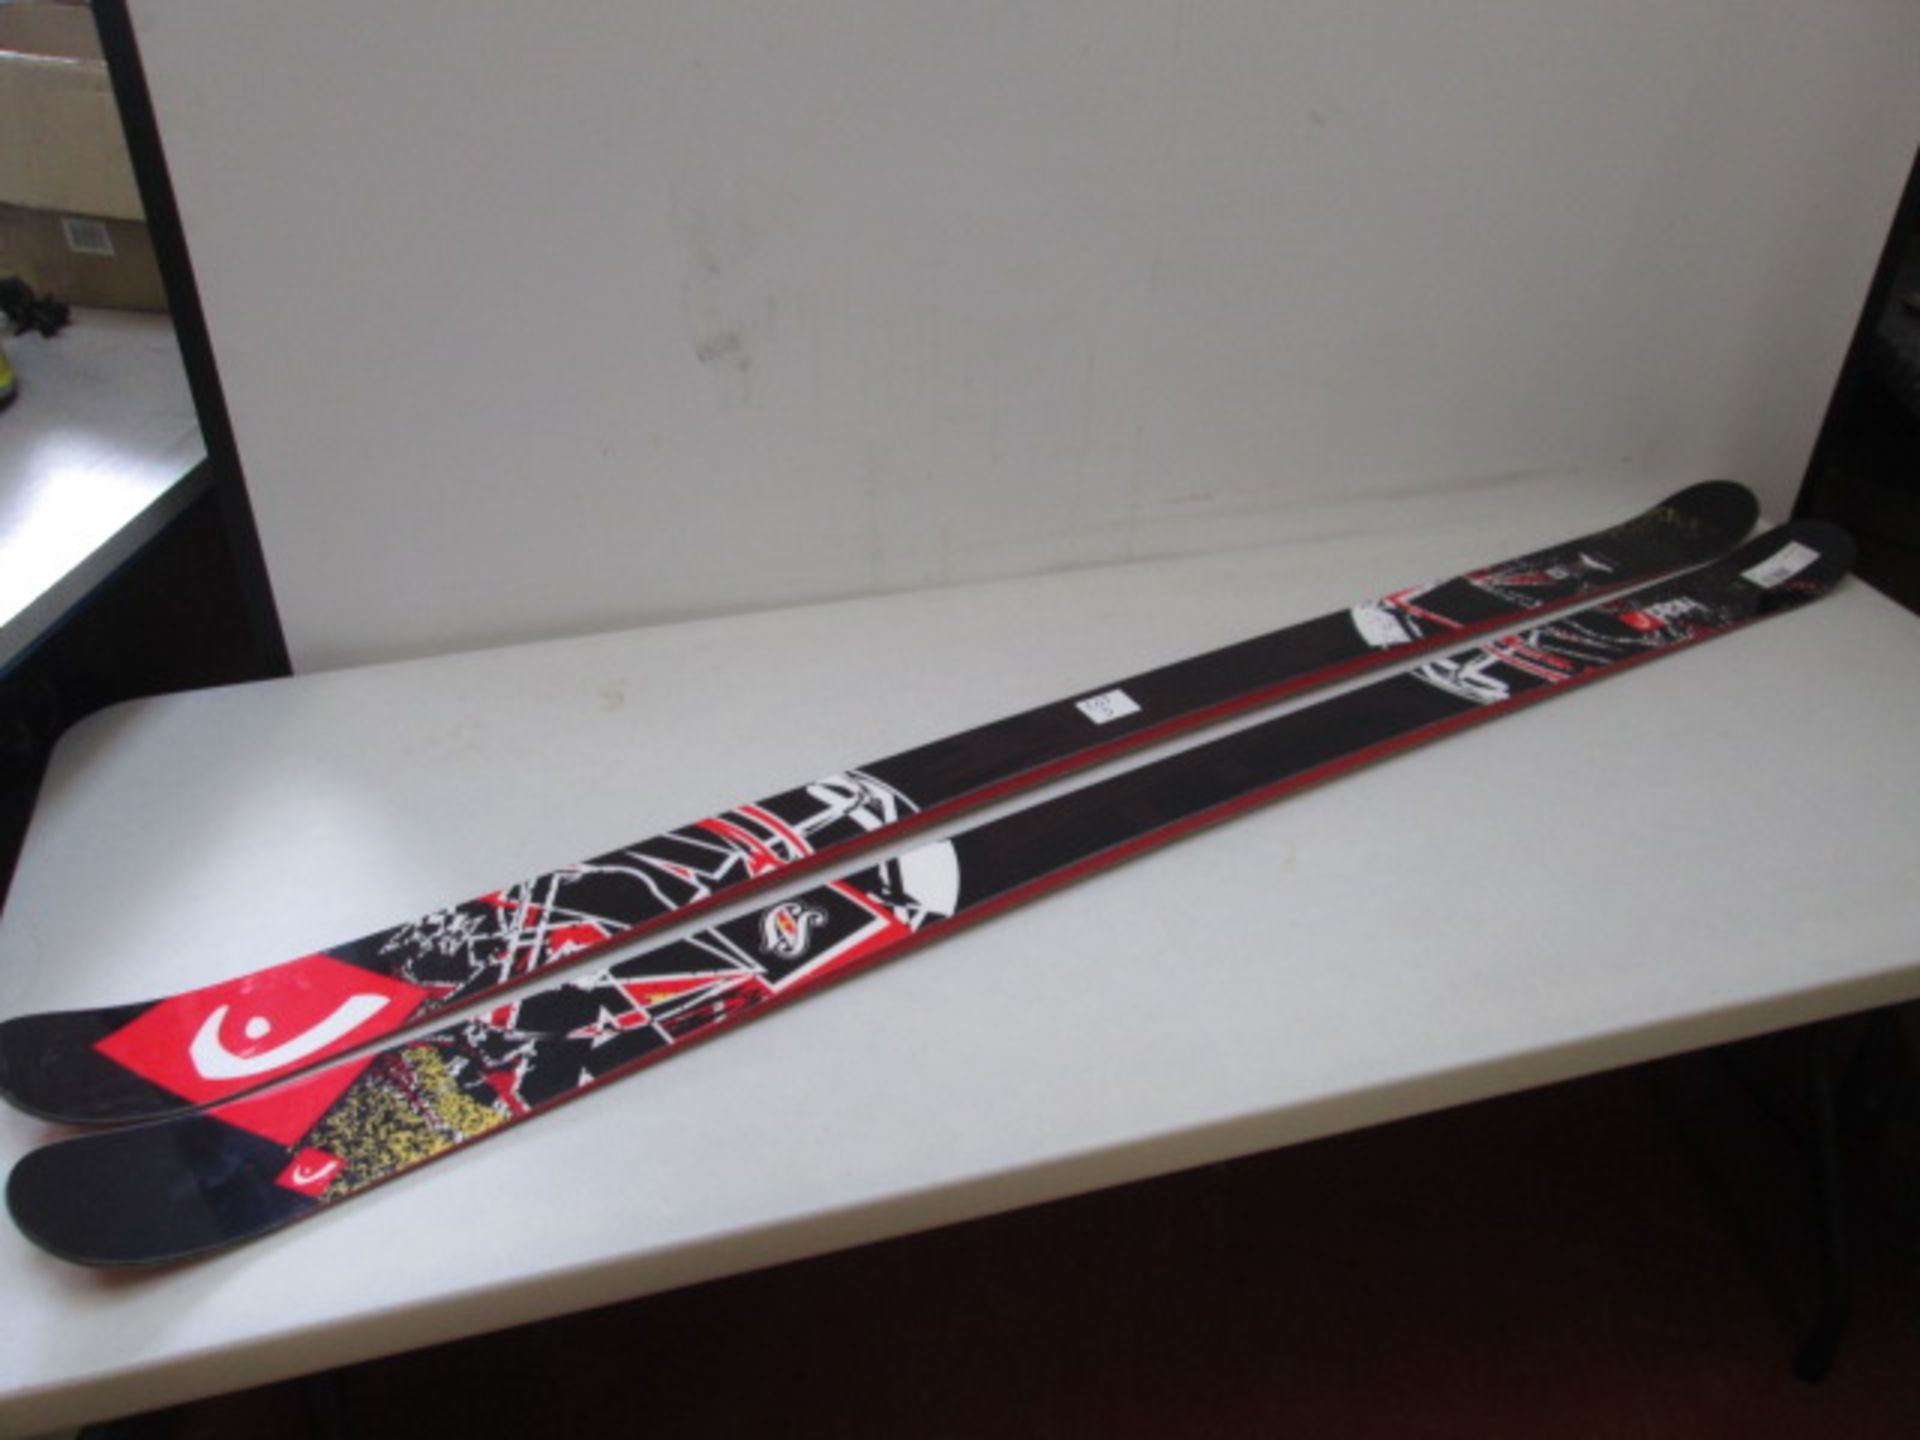 Head 'The Caddy' Park & Pipe 1.8m Skis. RRP £225.00